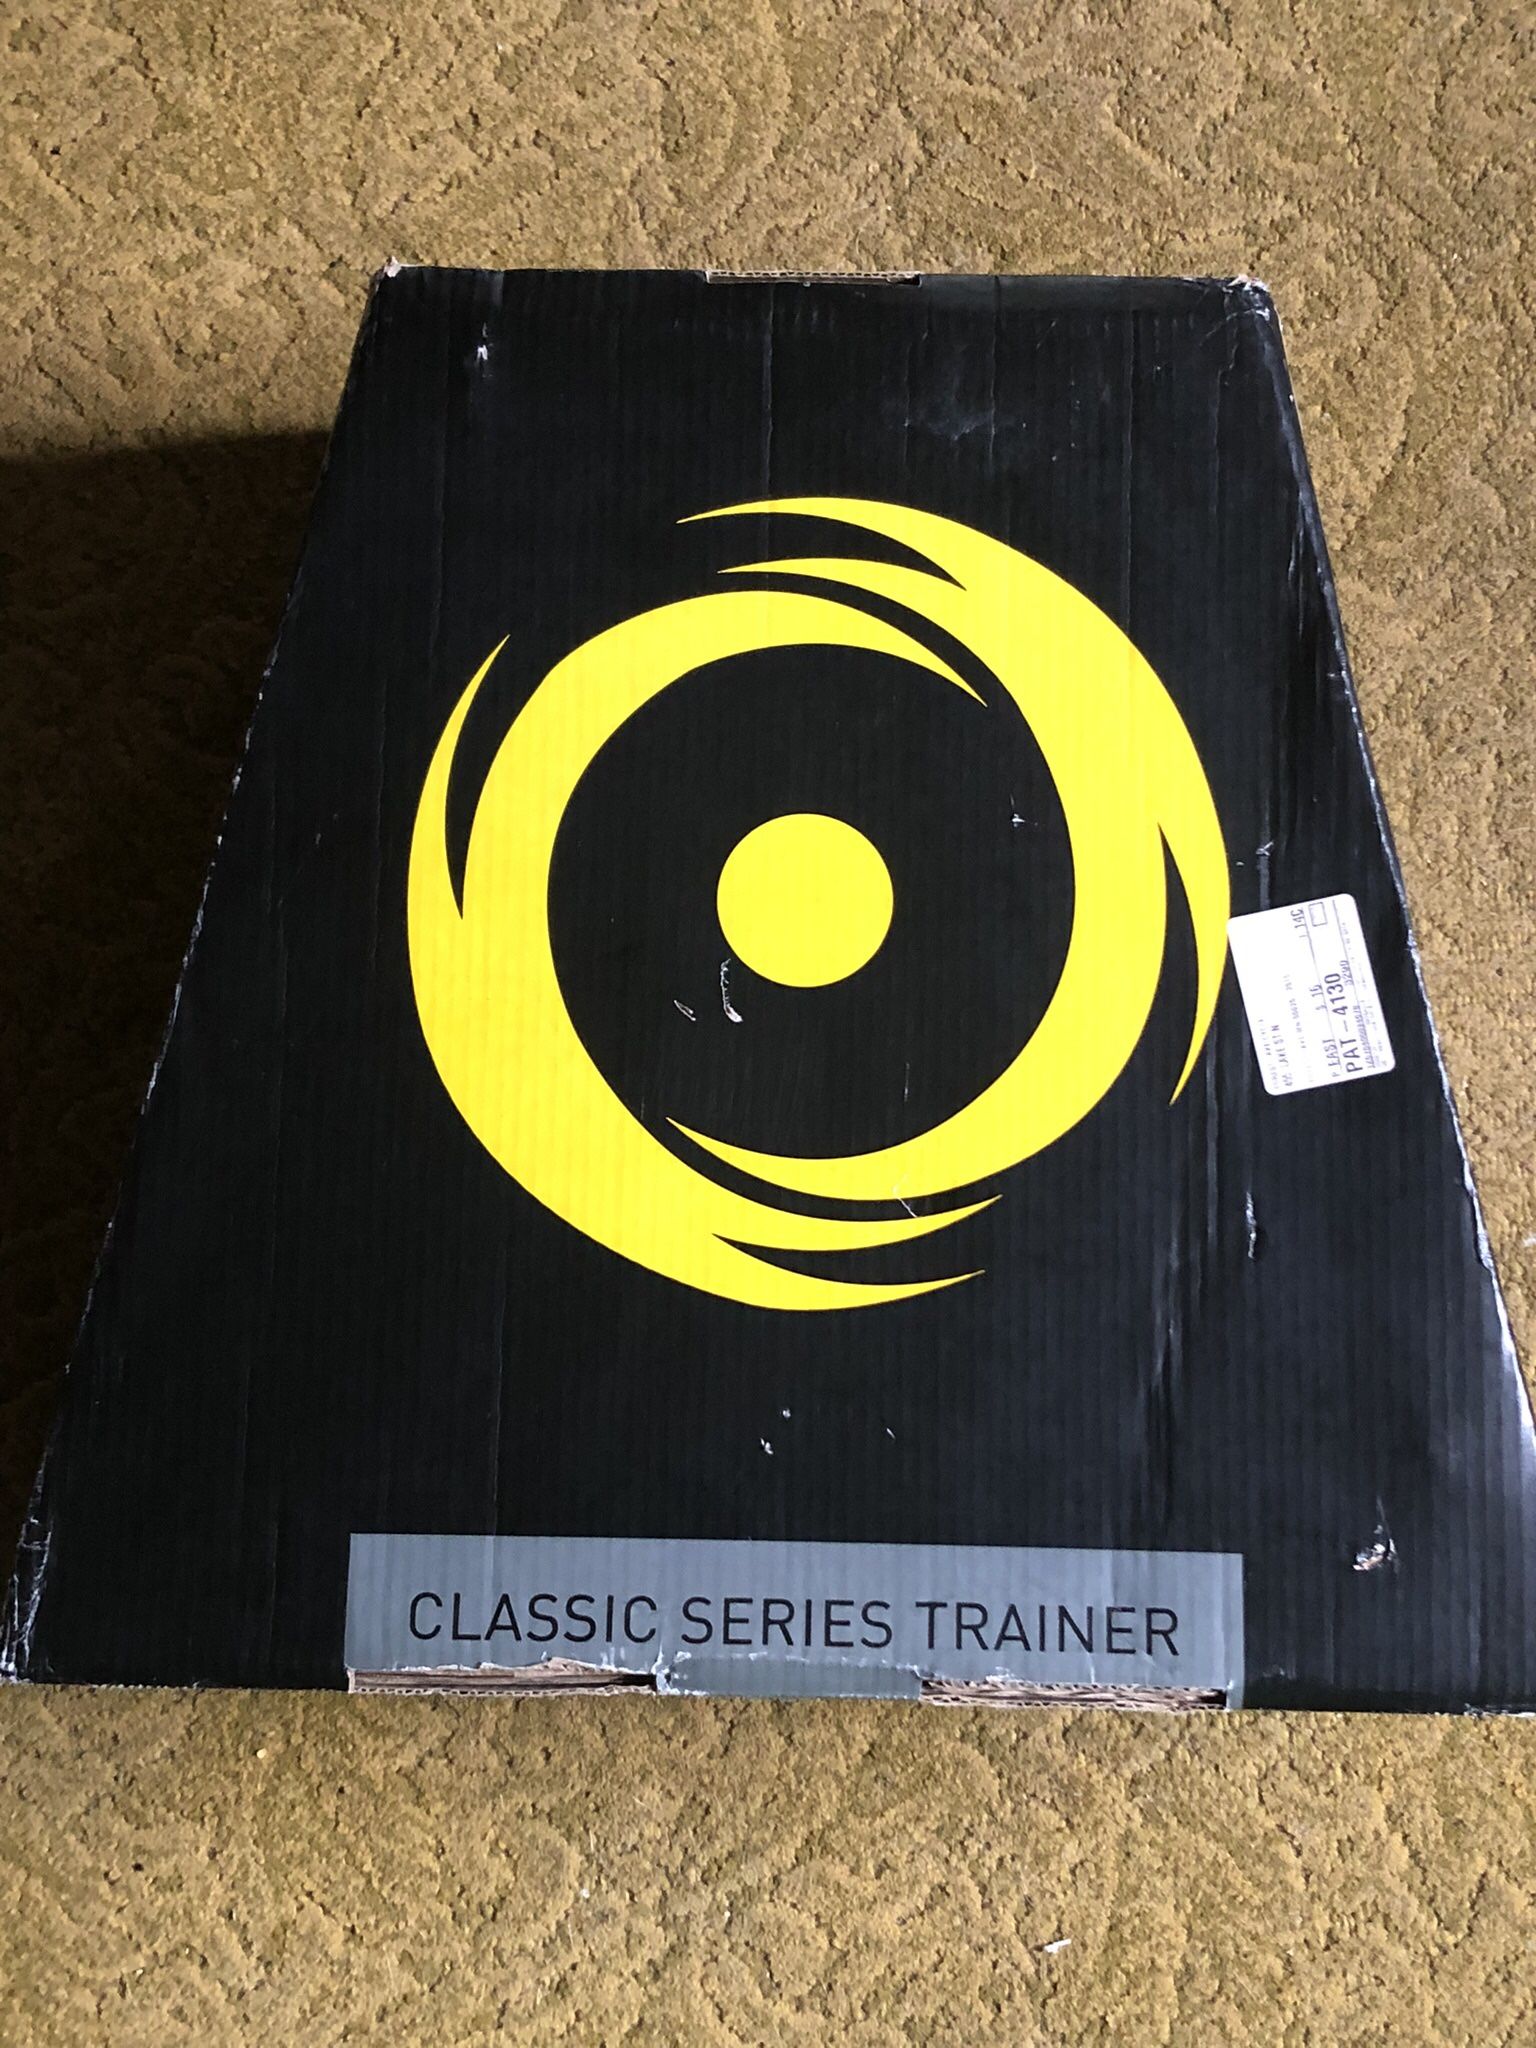 CycleOps Bike Trainer - Excellent Condition !